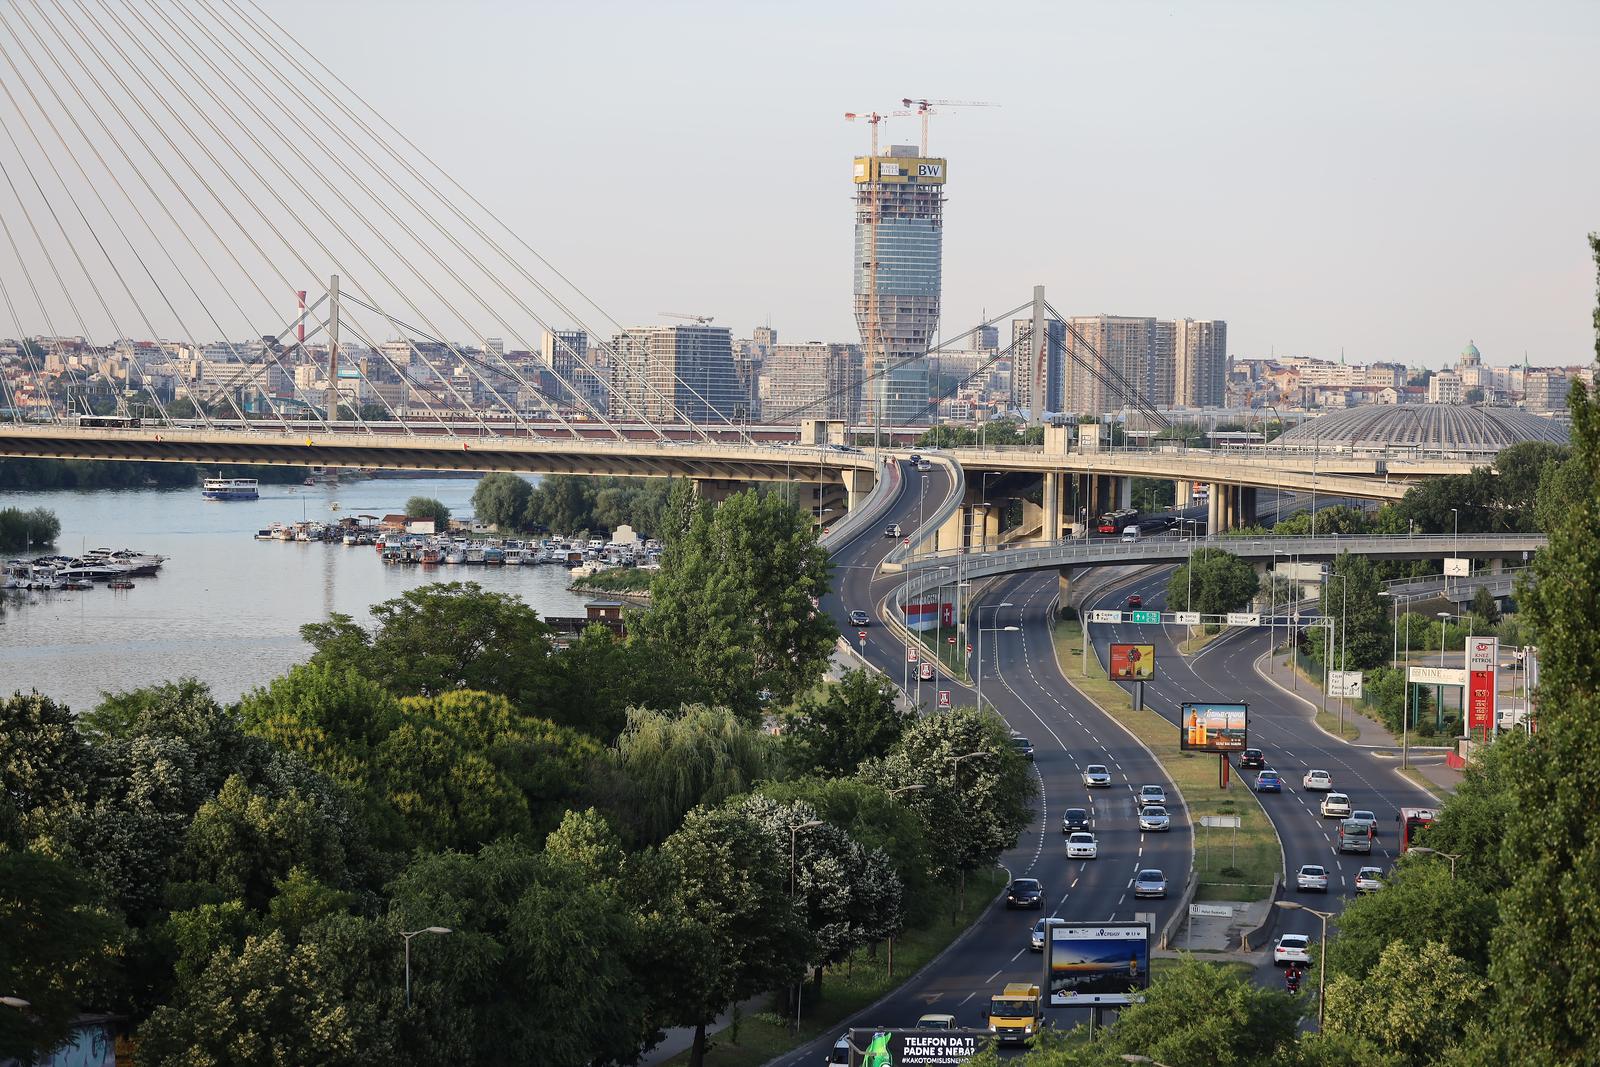 18, June, 2021, Belgrade - View of Belgrade from the terrace of the Ada Mall. Radnicka  loop on the approach to the bridge on Ada. Photo: Milan Maricic/ATAImagesrr18, jun, 2021, Beograd - Pogled na Beograd sa terase trznog centra Ada Mall. Photo: Milan Maricic/ATAImages